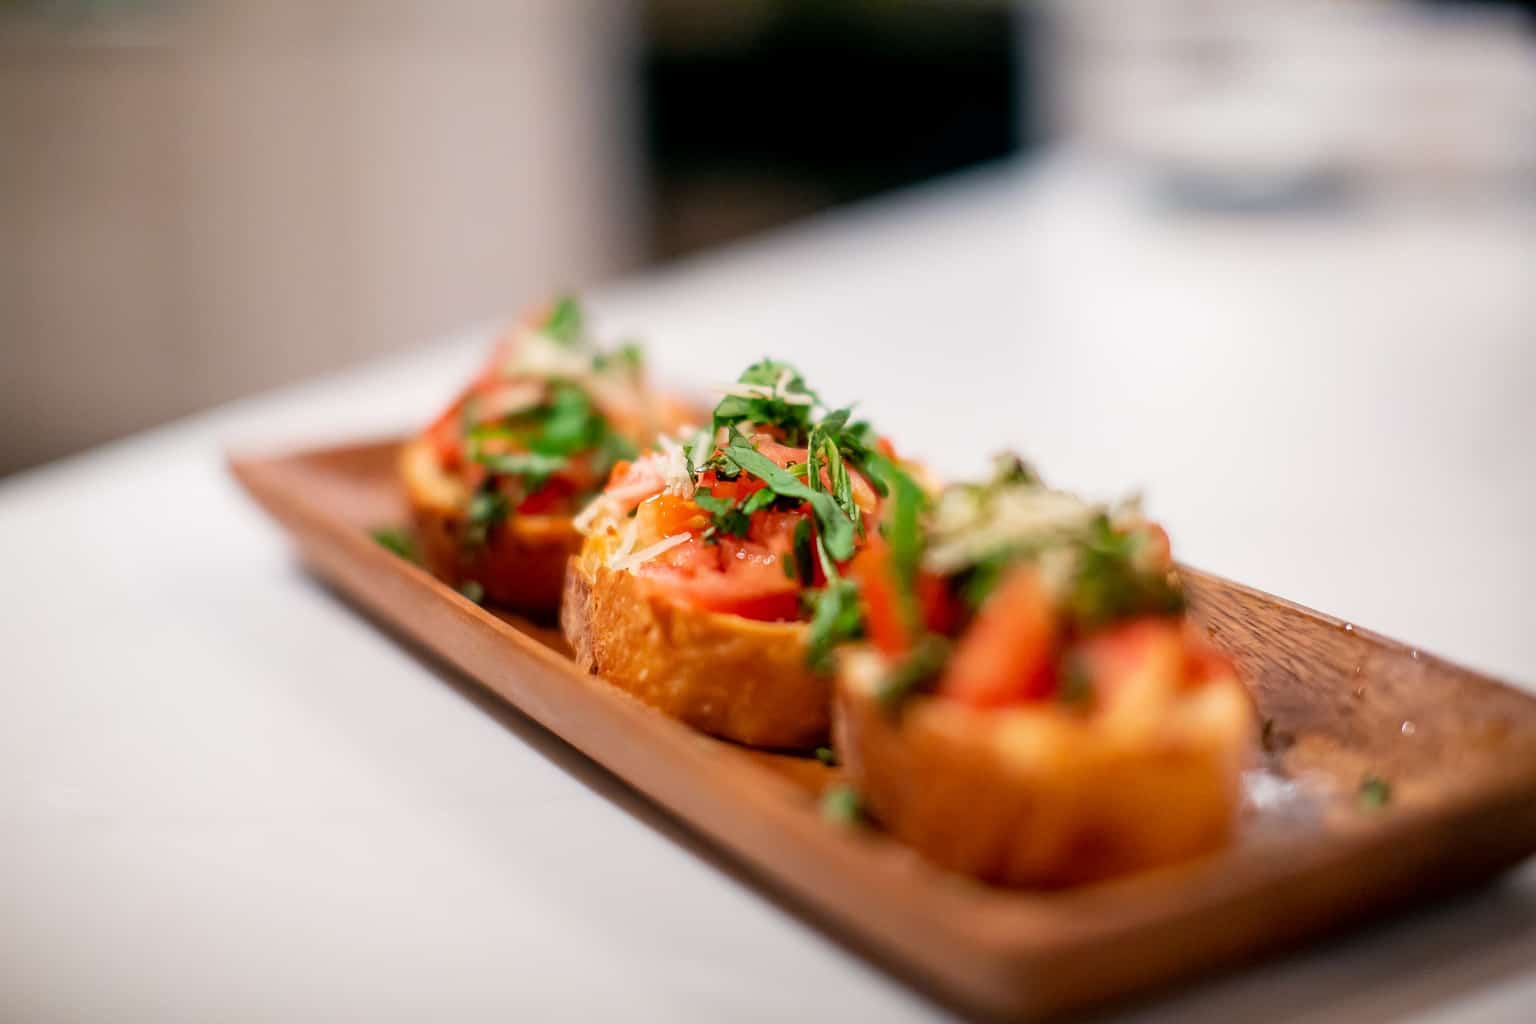 Three toasted bruschetta with tomatoes and herbs served on a brown wooden plate